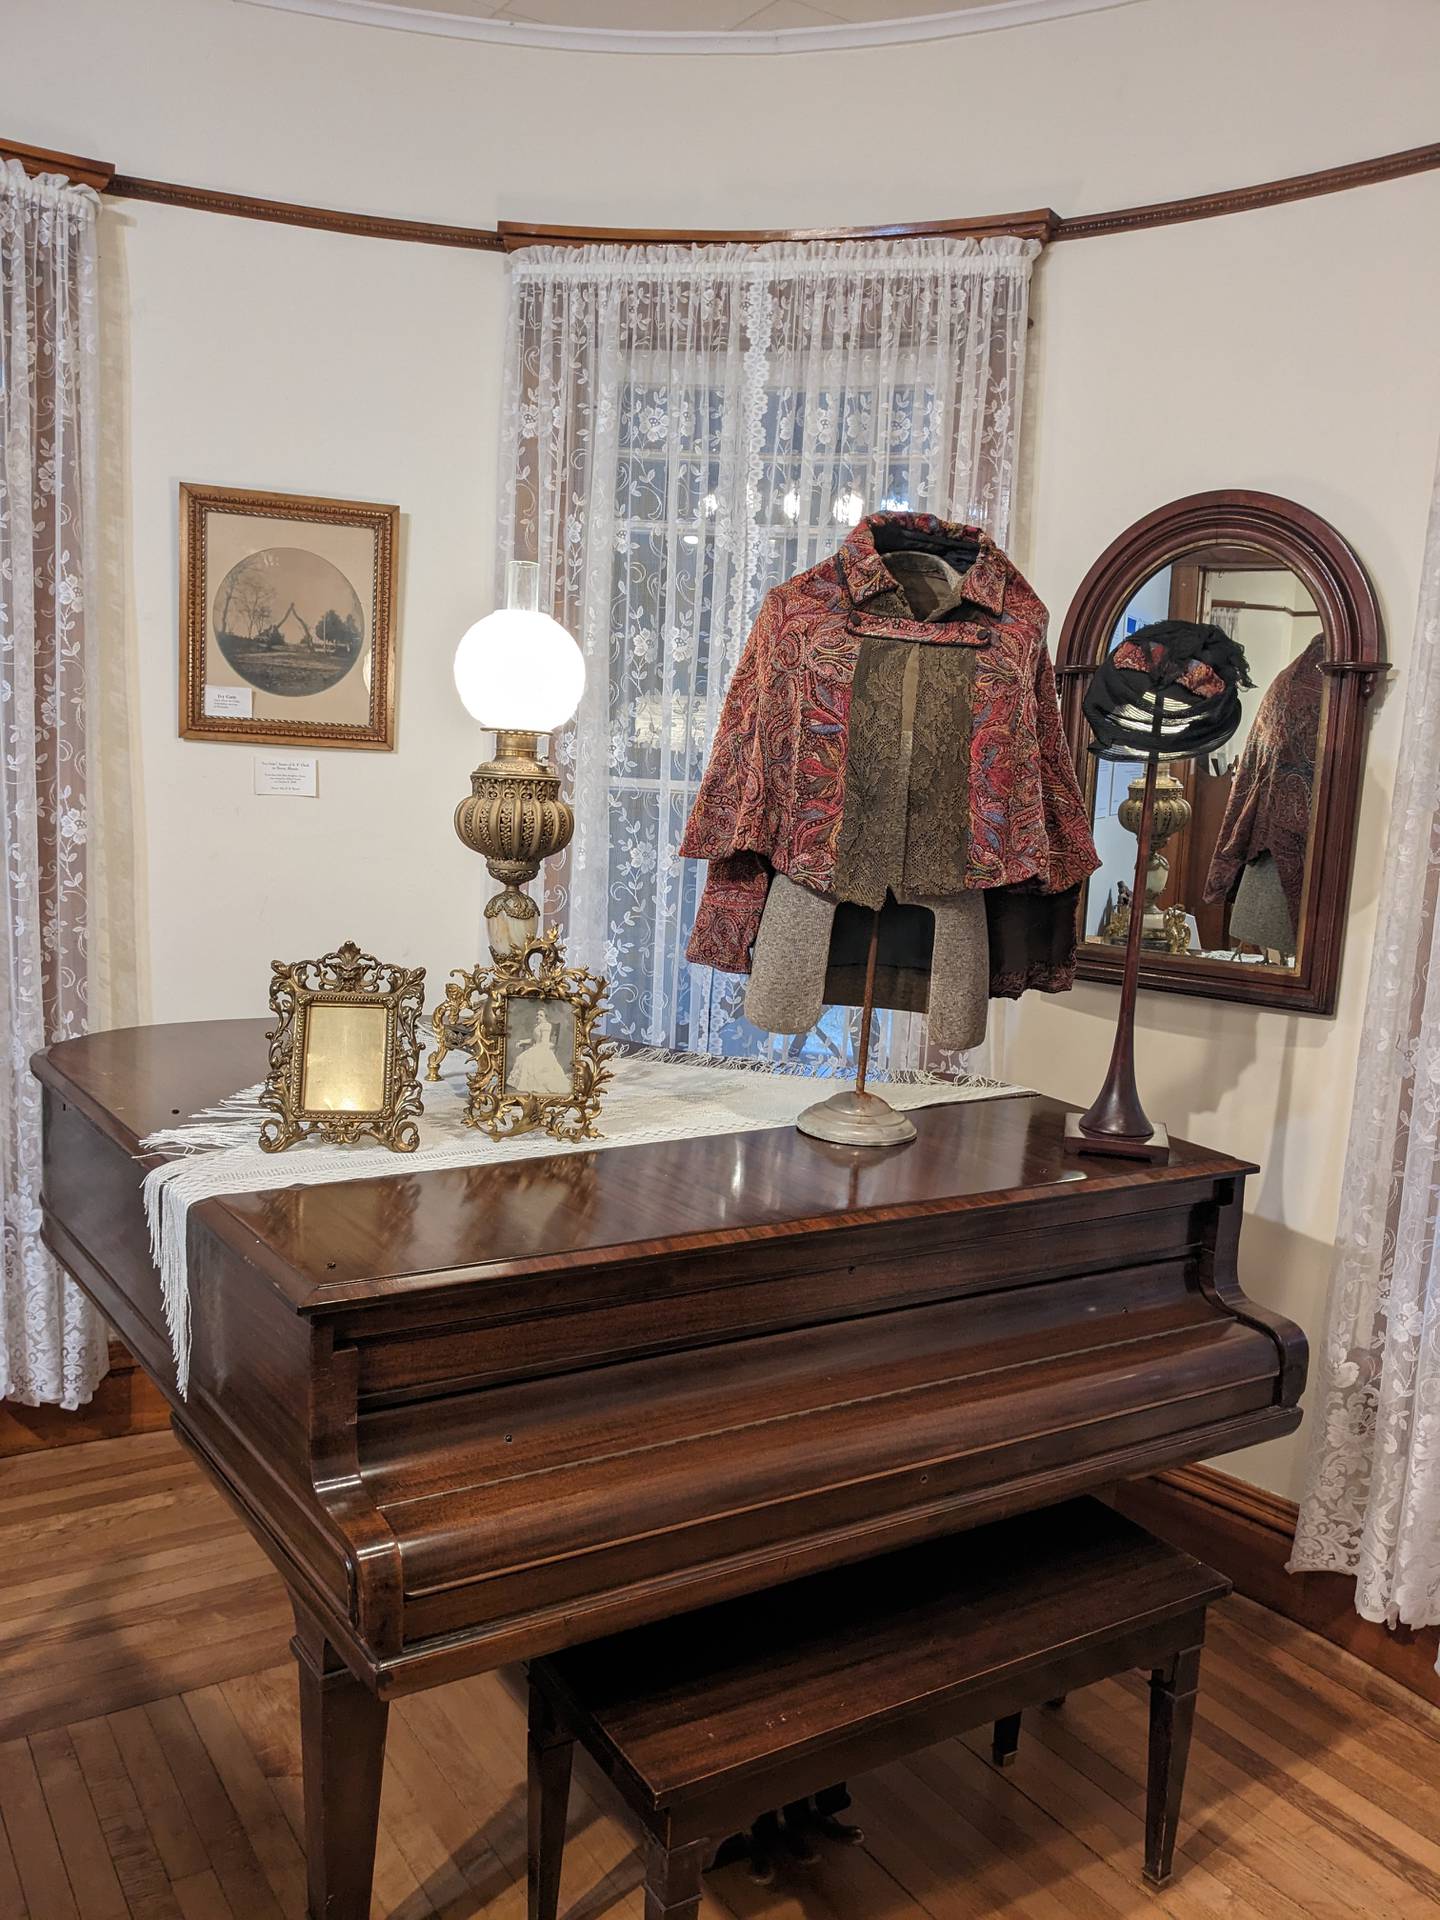 The exhibit was created by BCHS Curator Jessica Gray and takes an intimate look at the lives of Grace Clark Norris, her parents Same and Ann Clark, the early days of the Clarks’ marriage in Dover in the 1860′s and the building of their home in 1900 at 109 Park Avenue West in Princeton.